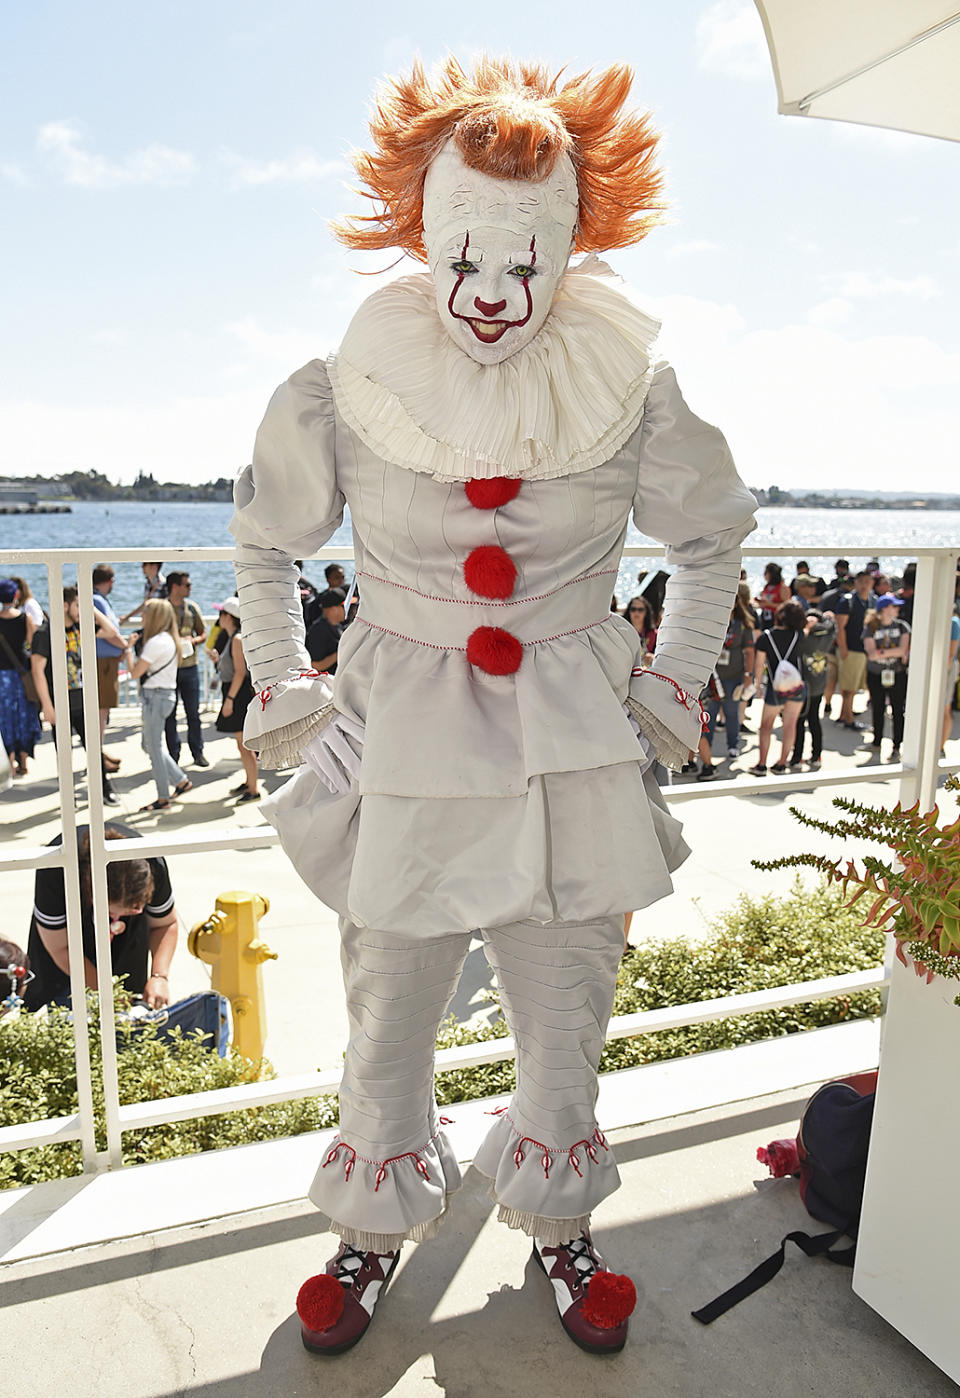 <p>Juliana Bove, of San Diego, dressed as Pennywise from the film <em>It</em>, at Comic-Con International on July 20, 2018, in San Diego. (Photo by Richard Shotwell/Invision/AP) </p>